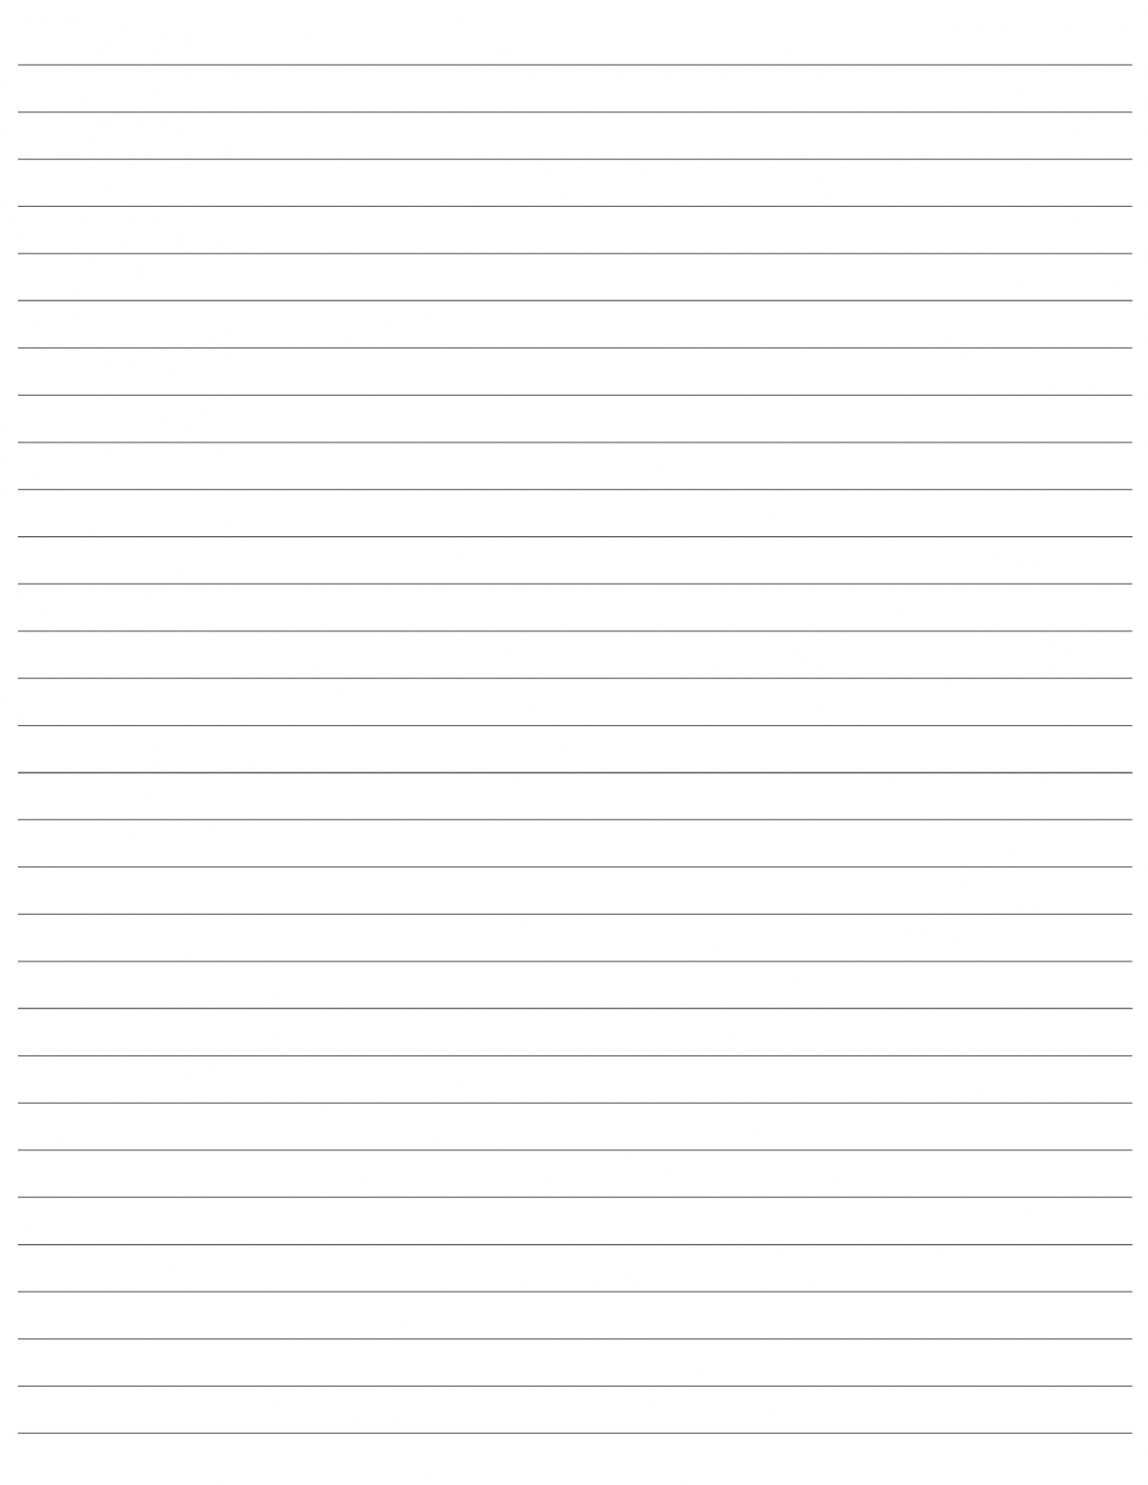 Printable Lined Paper -  Template Styles - World of Printables - FREE Printables - Wide Lined Paper